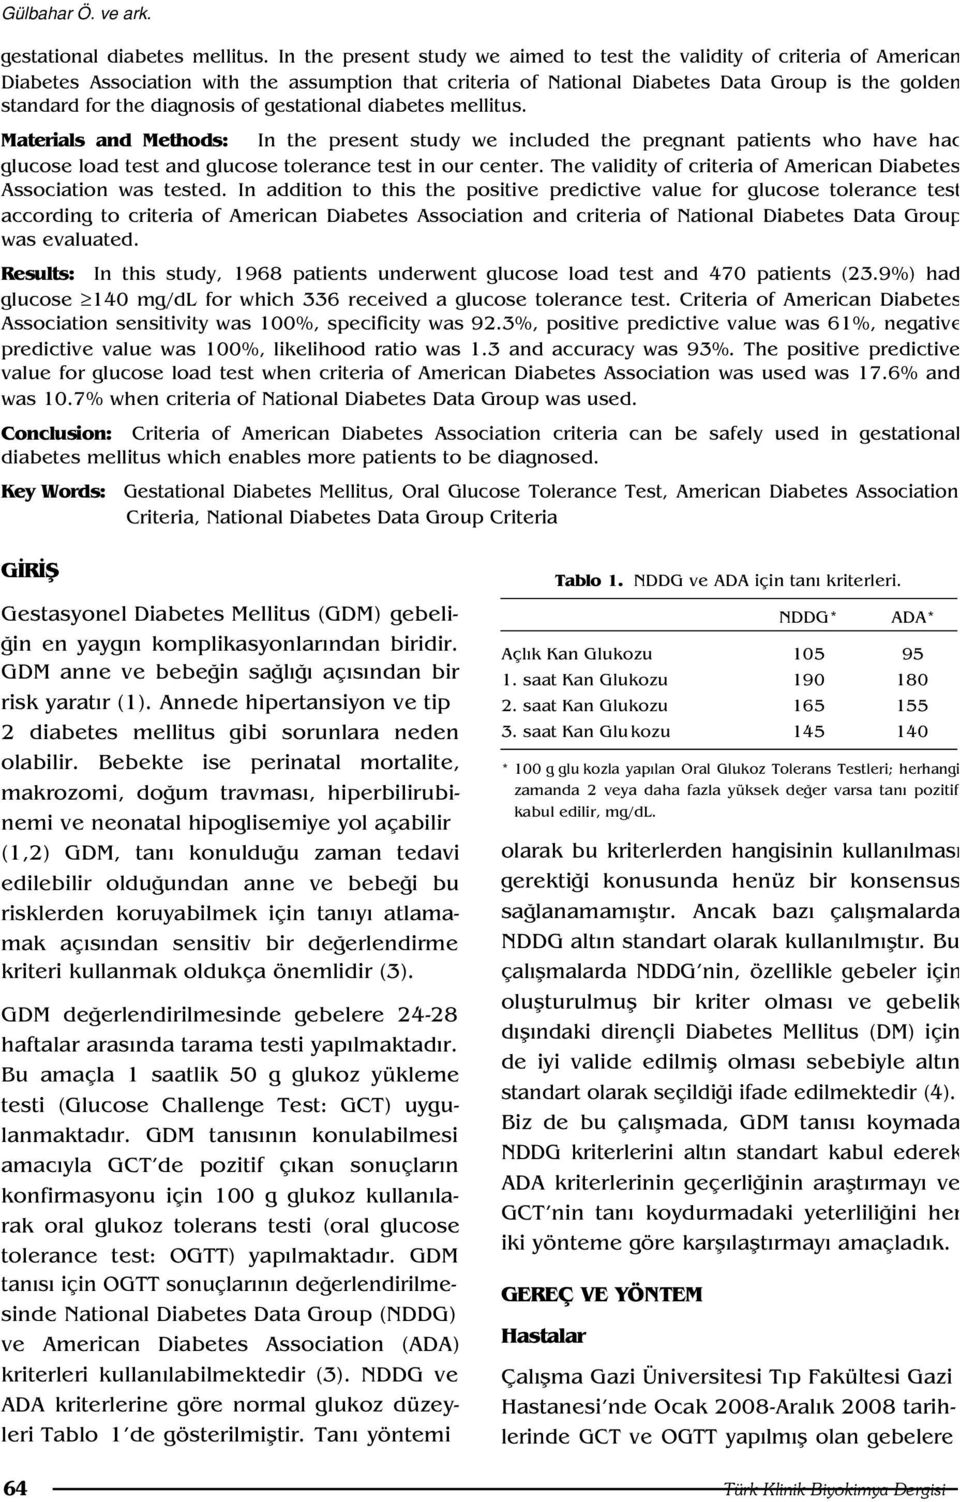 diagnosis of gestational diabetes mellitus. Materials and Methods: In the present study we included the pregnant patients who have had glucose load test and glucose tolerance test in our center.